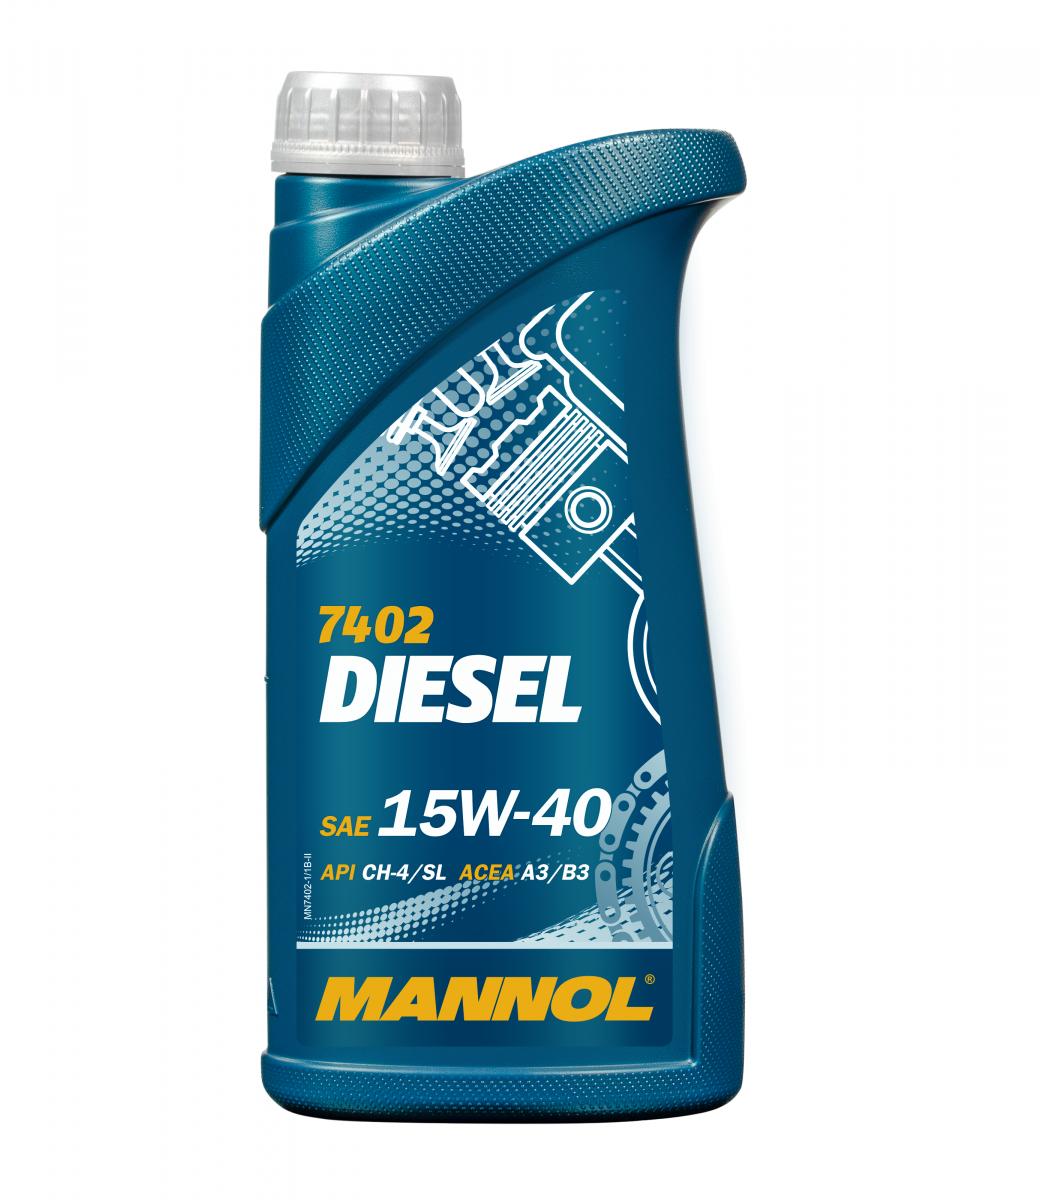  RESURS DIESEL 150 g. Diesel Oil Additive For  Cars/Trucks/Tractors/Diggers Engines. Diesel Engine Restore. Quality Diesel  Oil Treatment With Active Nano Particles Restore Engine Without Disassembly  : Automotive